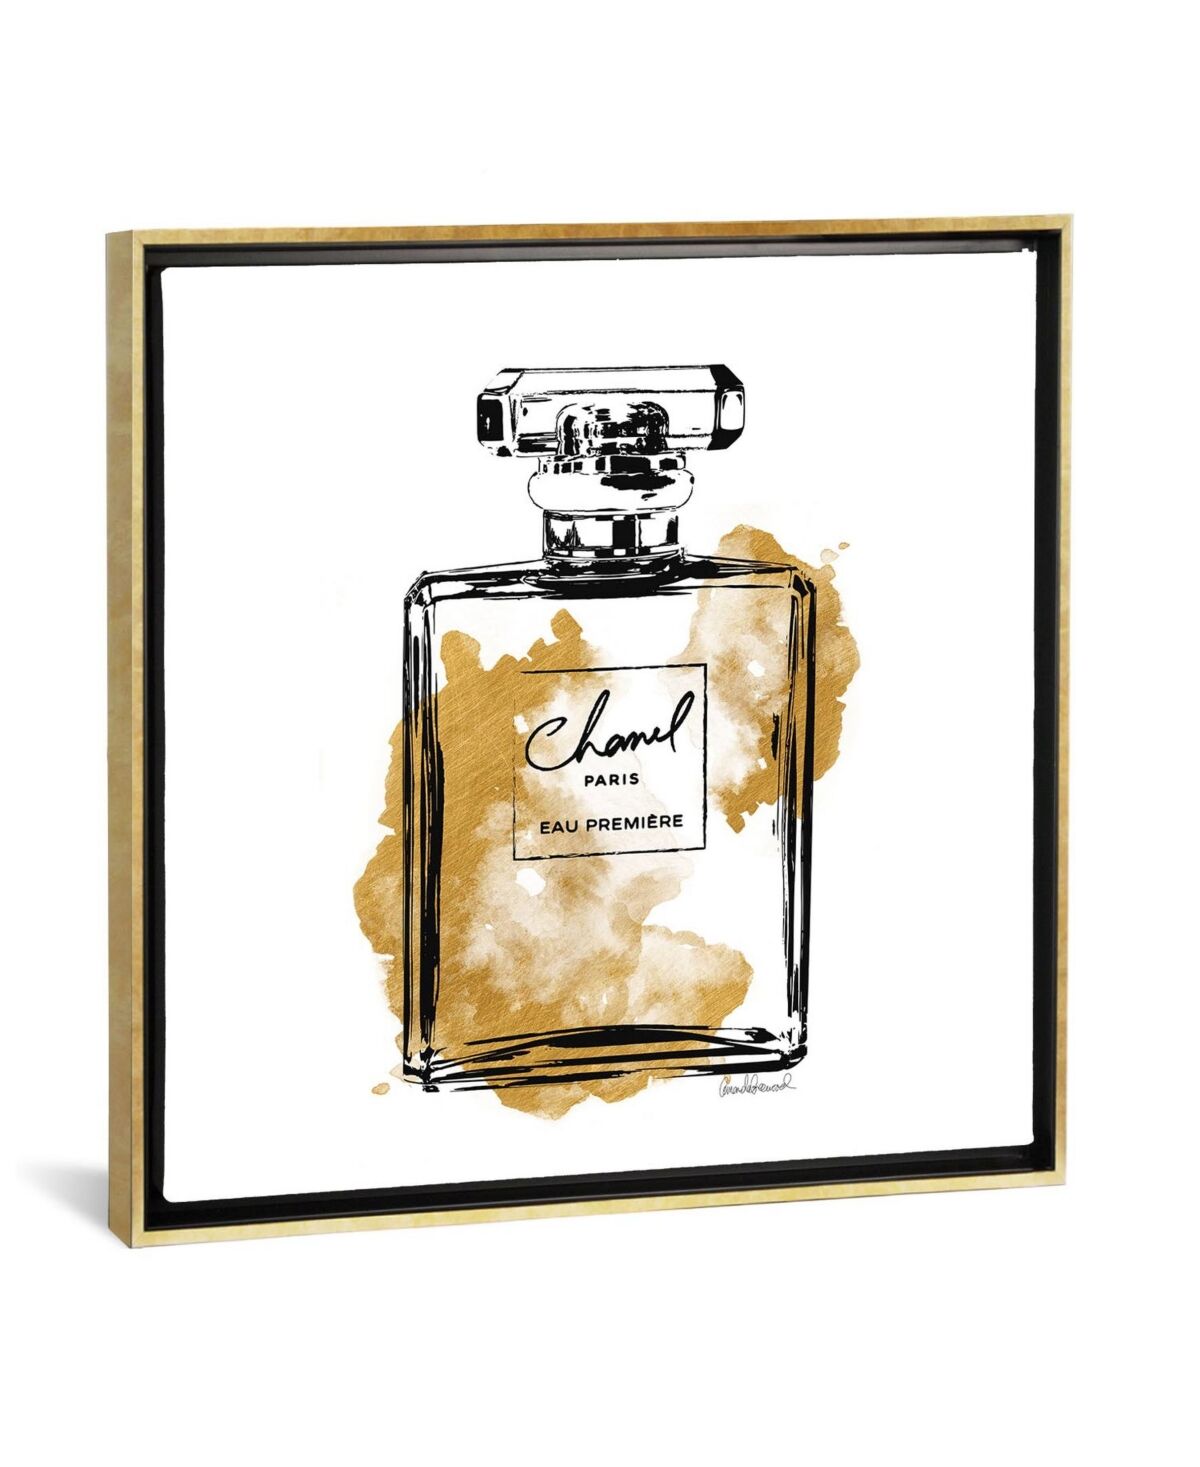 iCanvas Black and Gold Perfume Bottle by Amanda Greenwood Gallery-Wrapped Canvas Print - 37